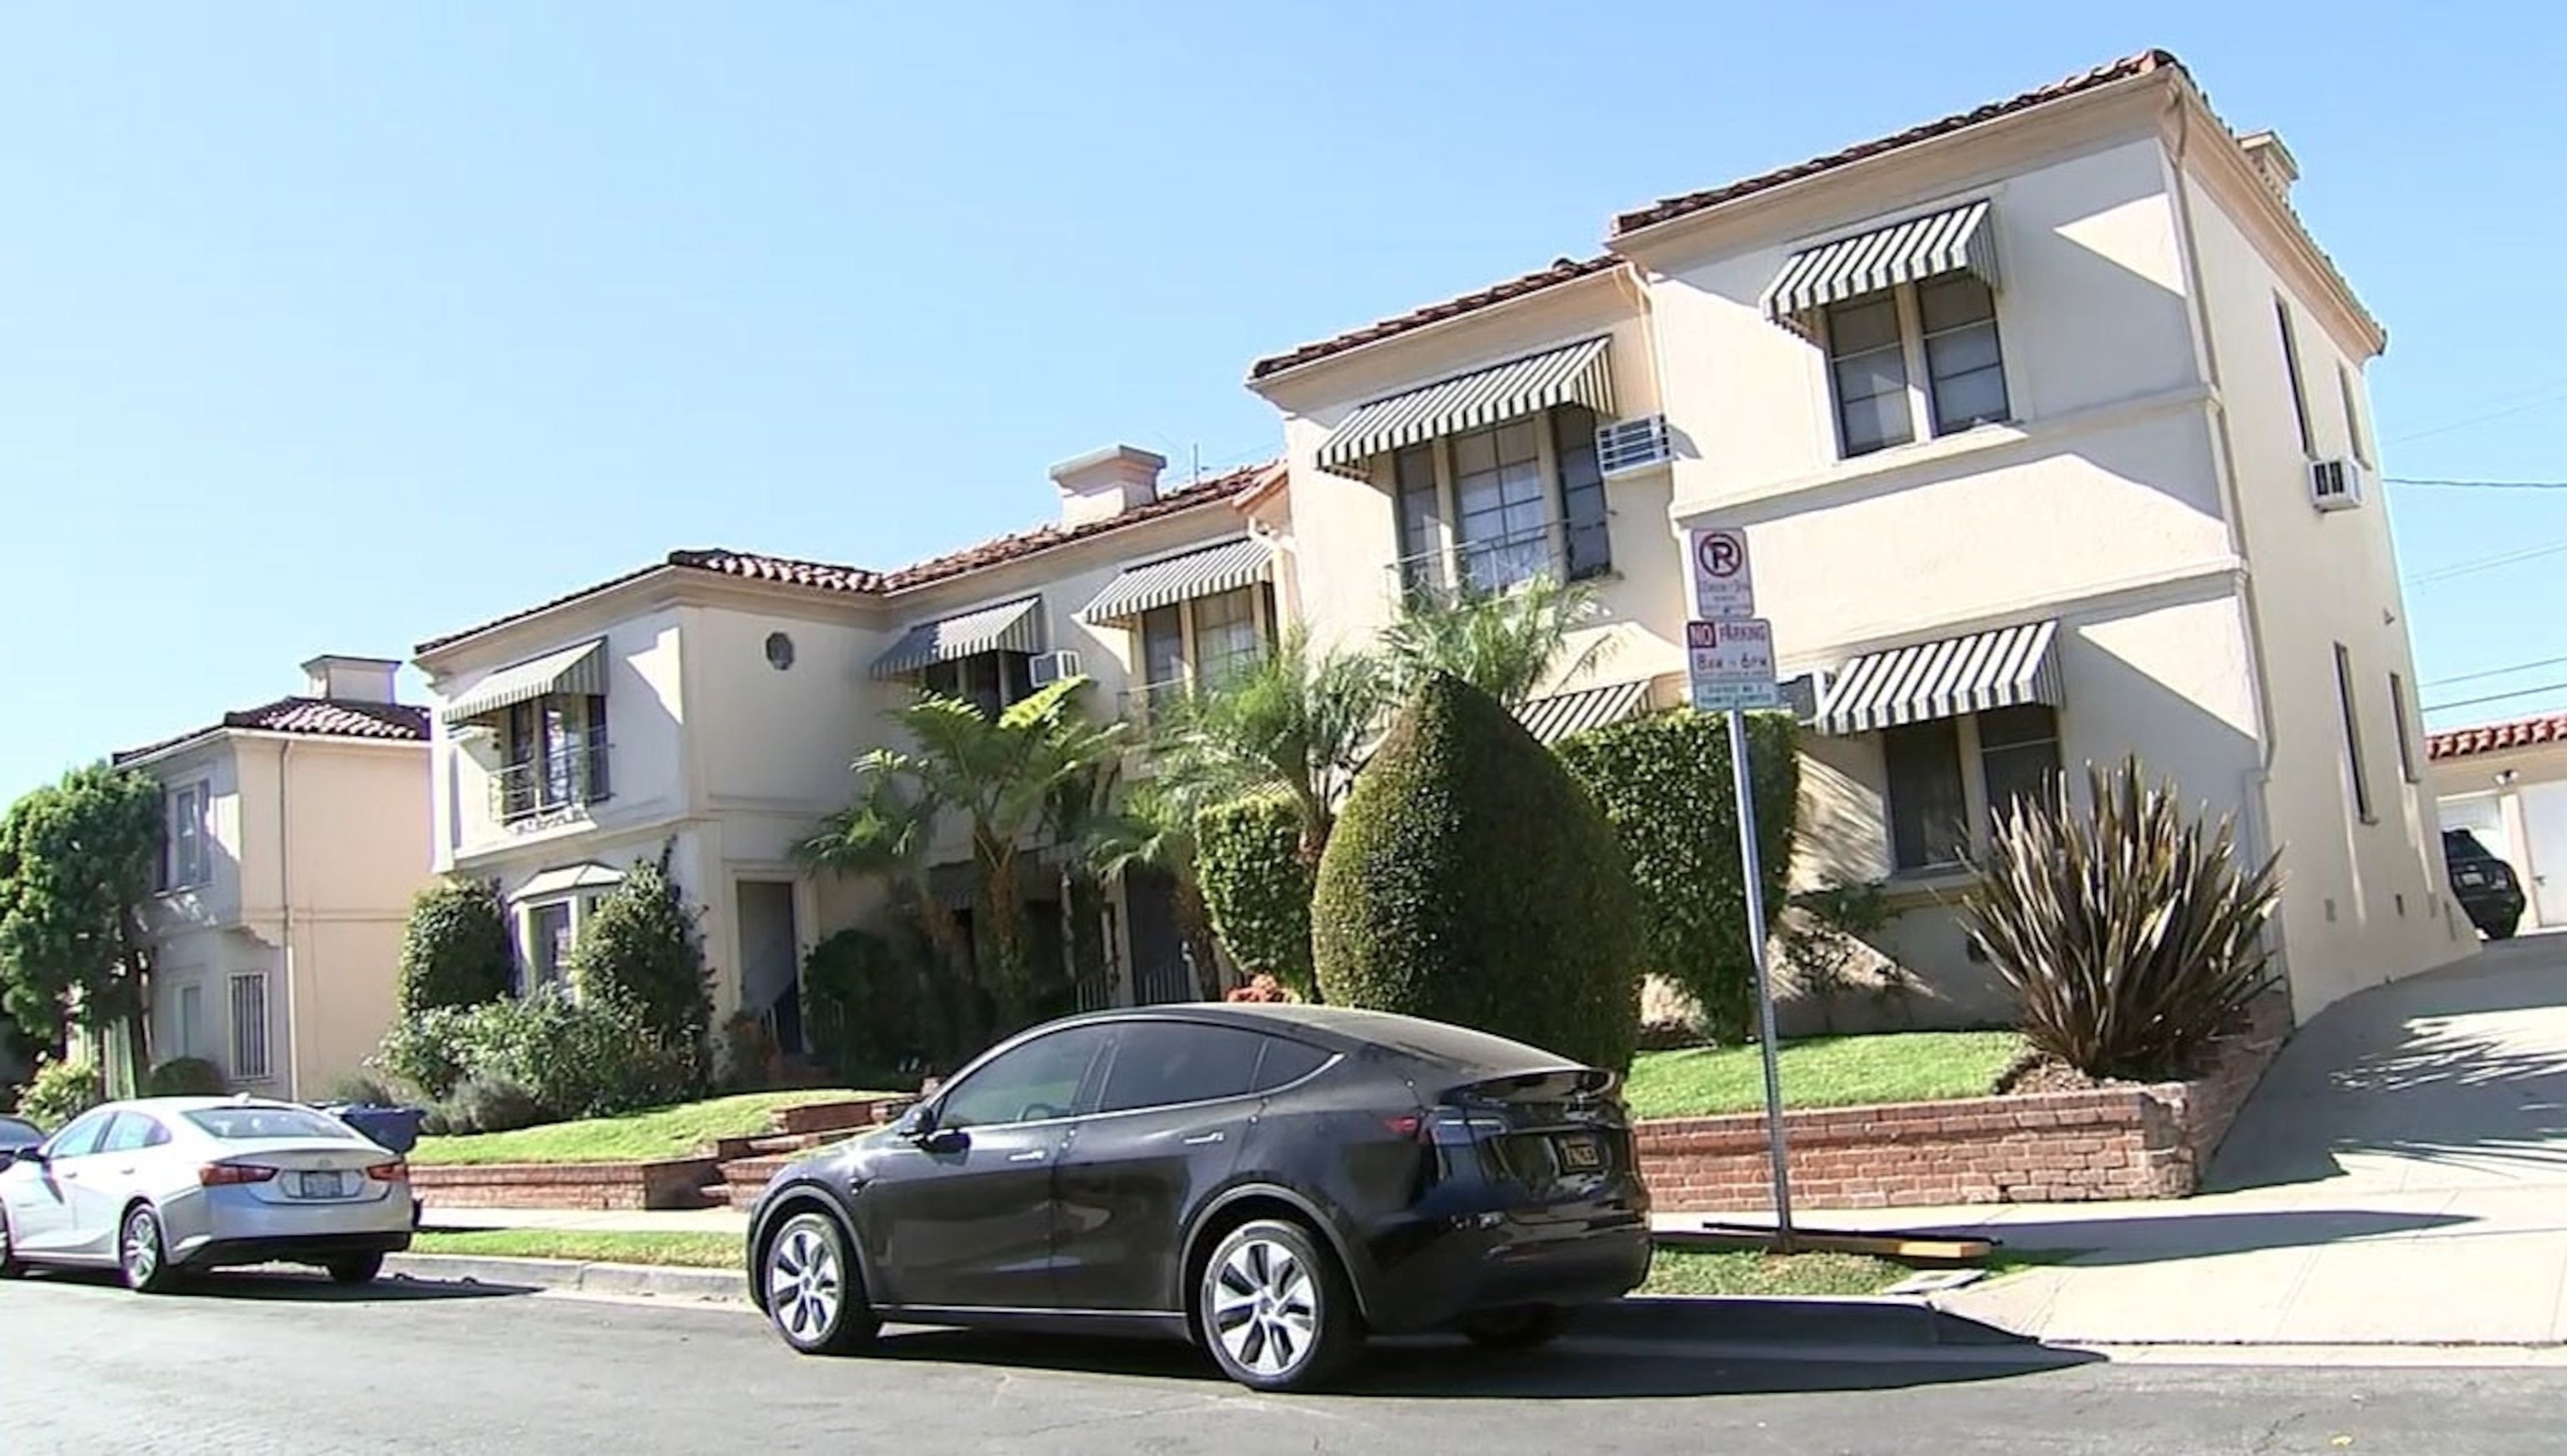 PHOTO: In this screen grab from a video, the building where Michael Latt lived is shown in Los Angeles.